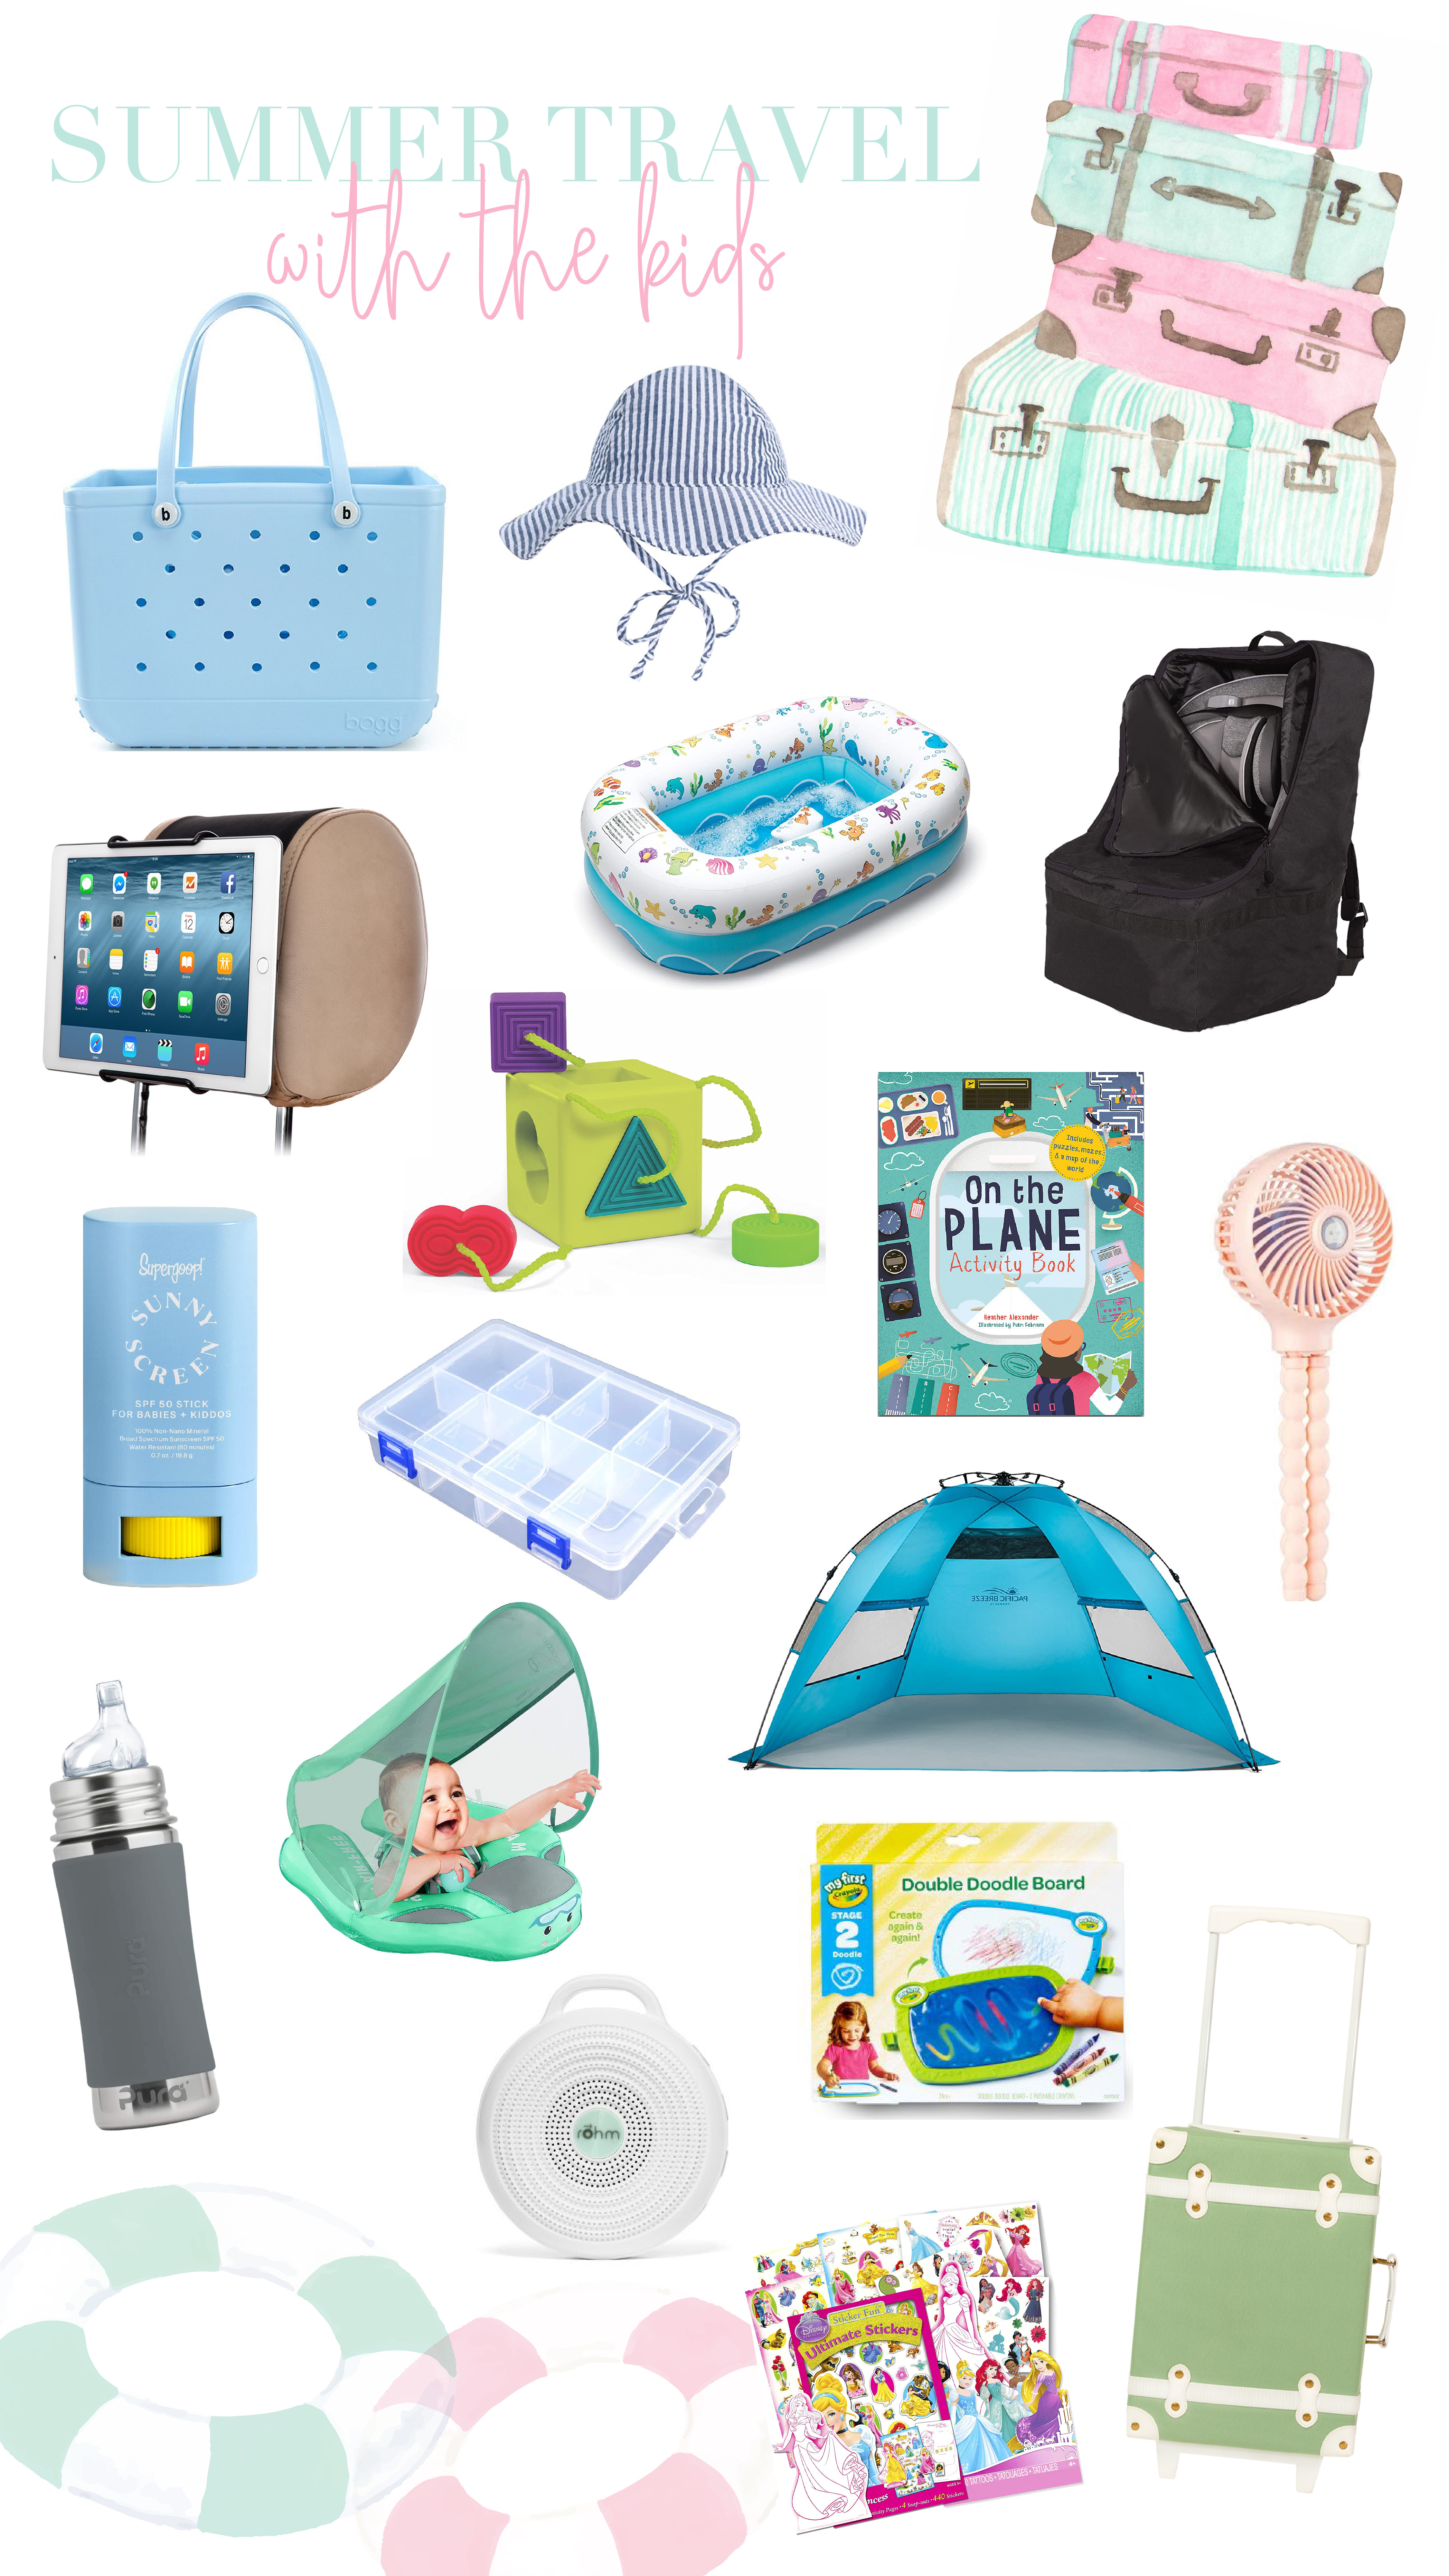 Our Go-To Travel Products for Toddlers